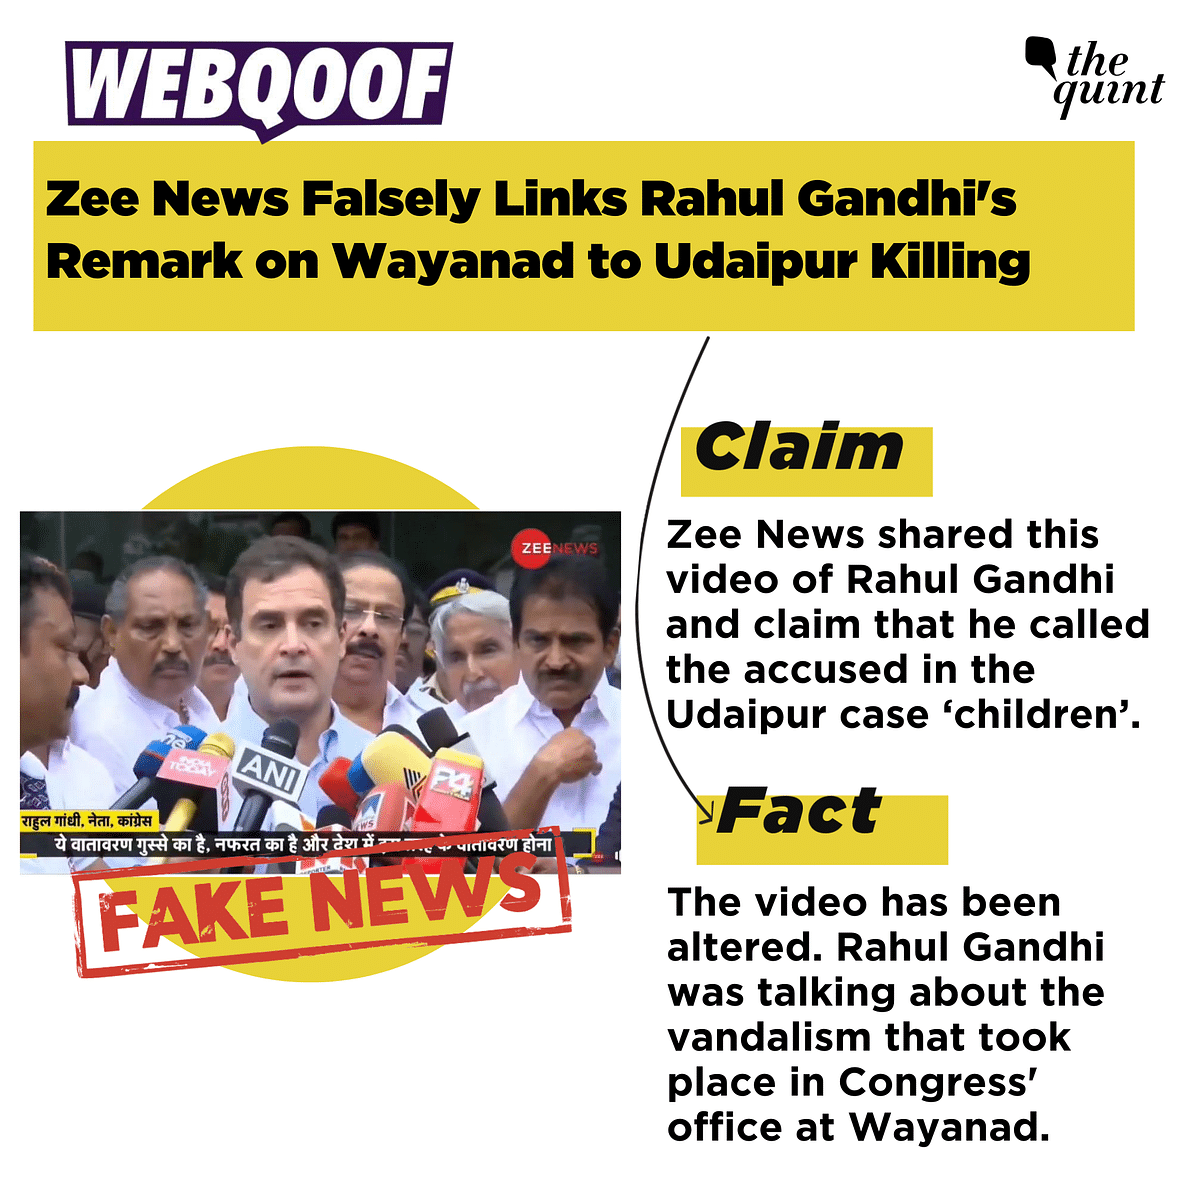 From an edited video of Rahul Gandhi to "Brahmin Atrocities Act petition," here's what misled the public this week. 